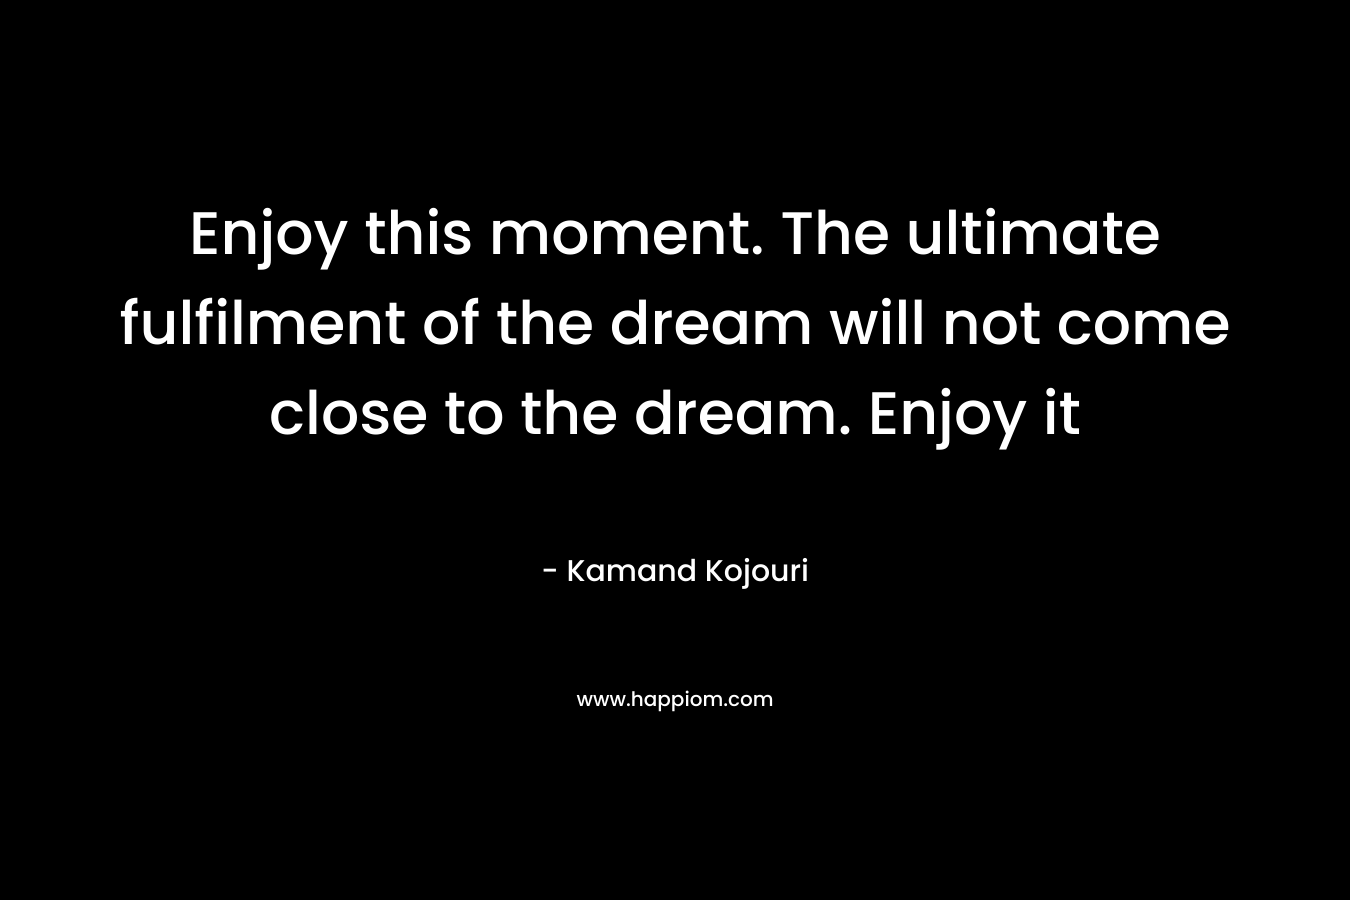 Enjoy this moment. The ultimate fulfilment of the dream will not come close to the dream. Enjoy it